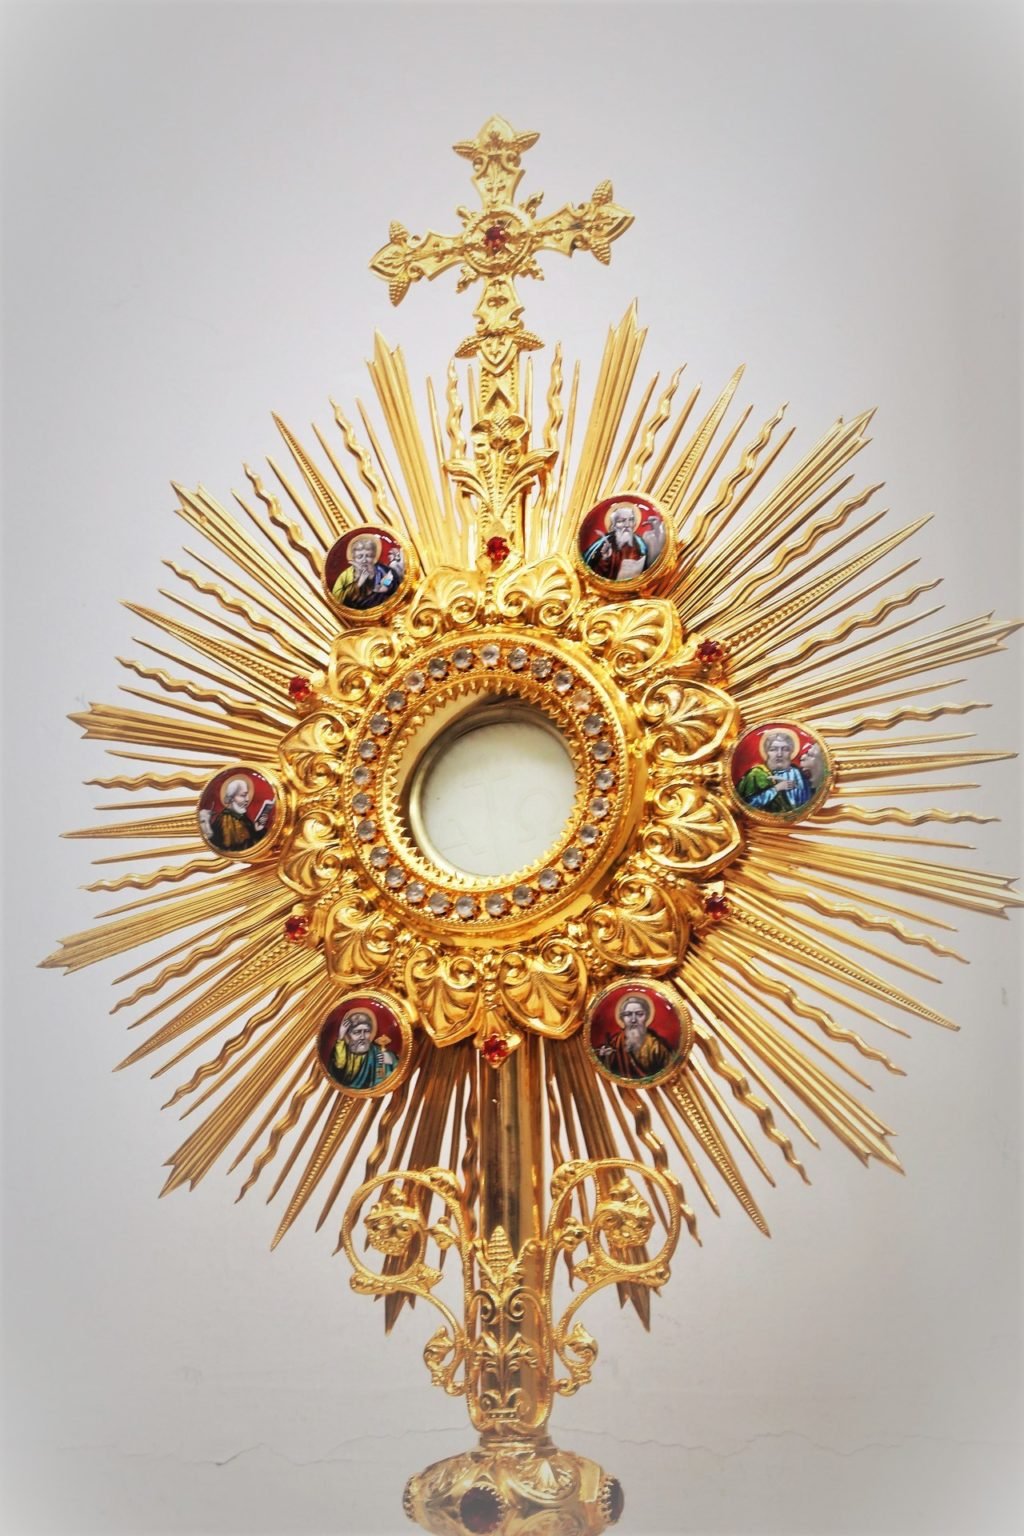 eucharistic coherence